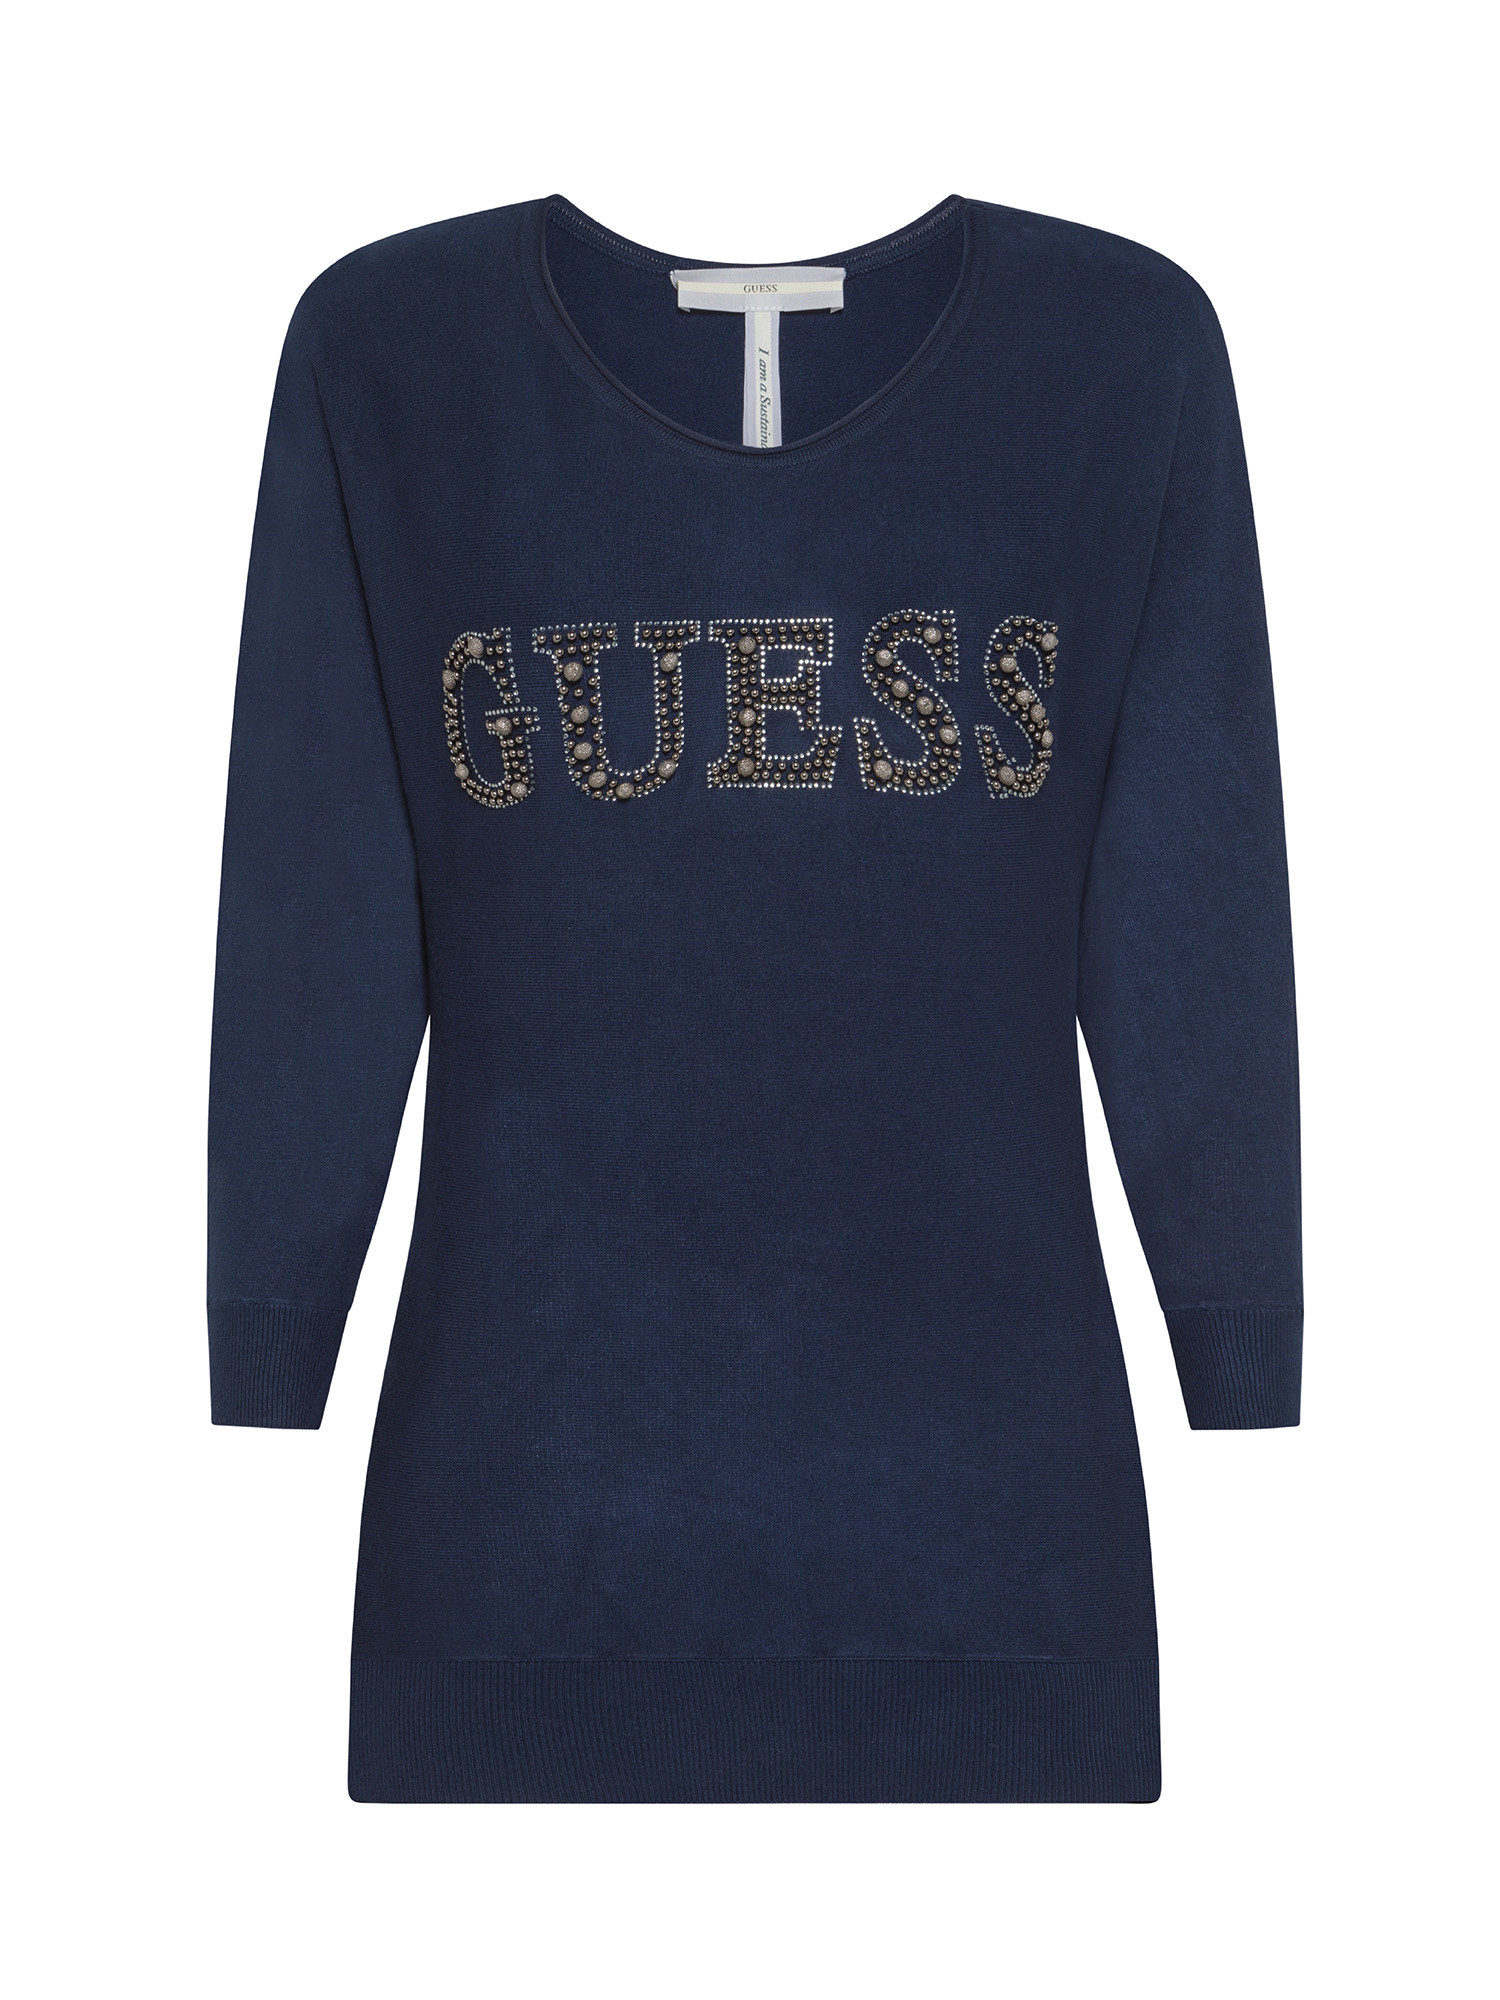 Guess - Regular fit sweater with logo with rhinestones, Black, large image number 0